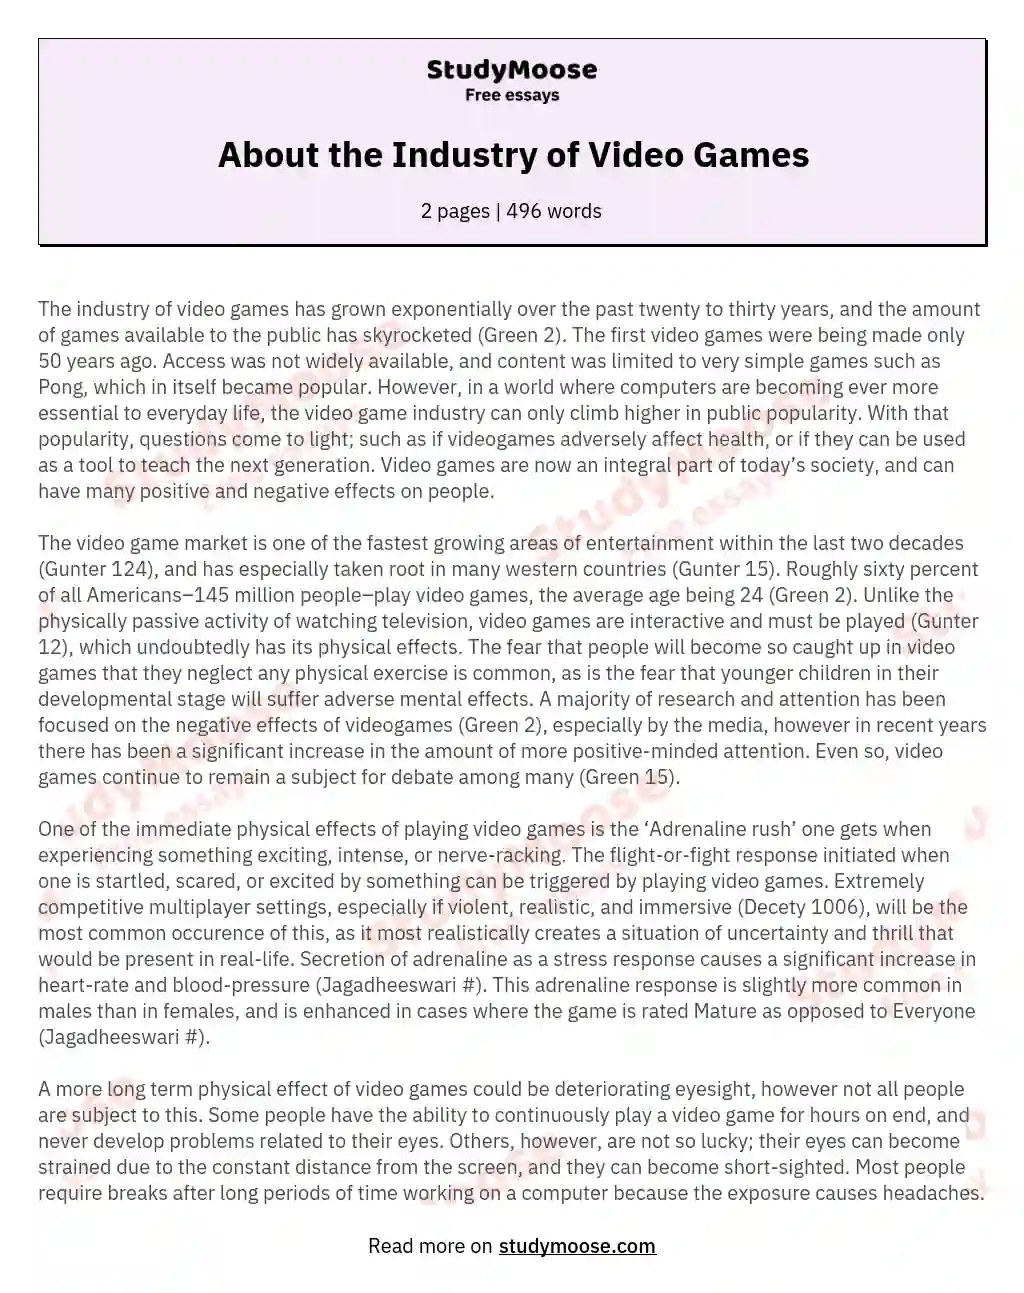 About the Industry of Video Games essay